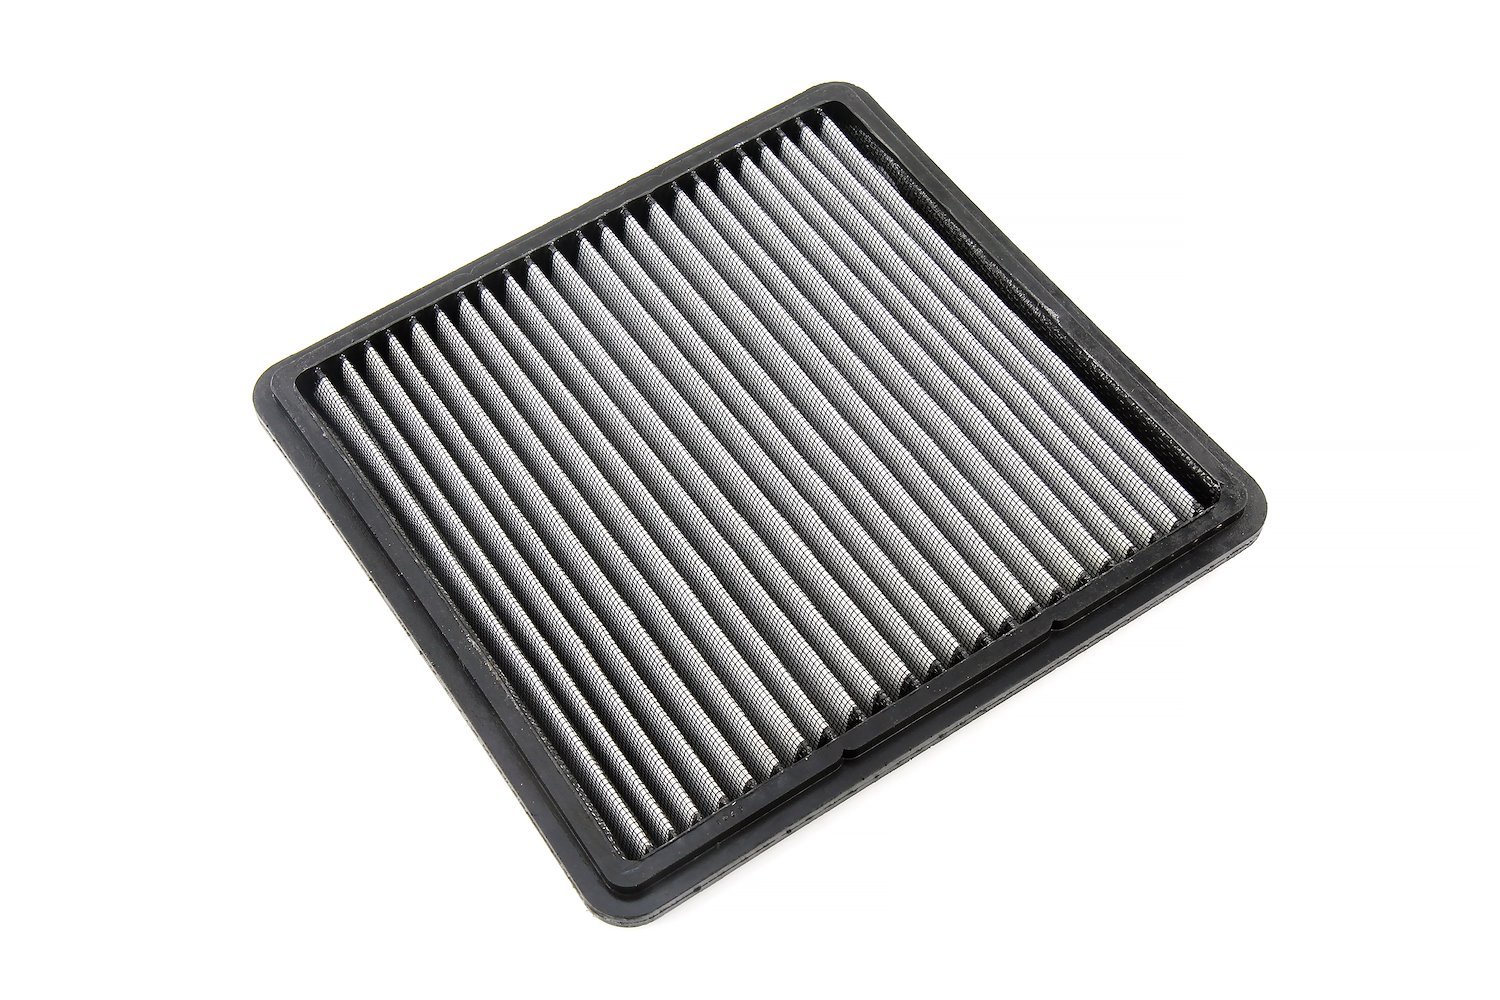 HPS-457017 Performance Drop-In Air Filter, Directly Replaces OEM Drop-In Panel Filter, Improves Performance & Fuel Economy